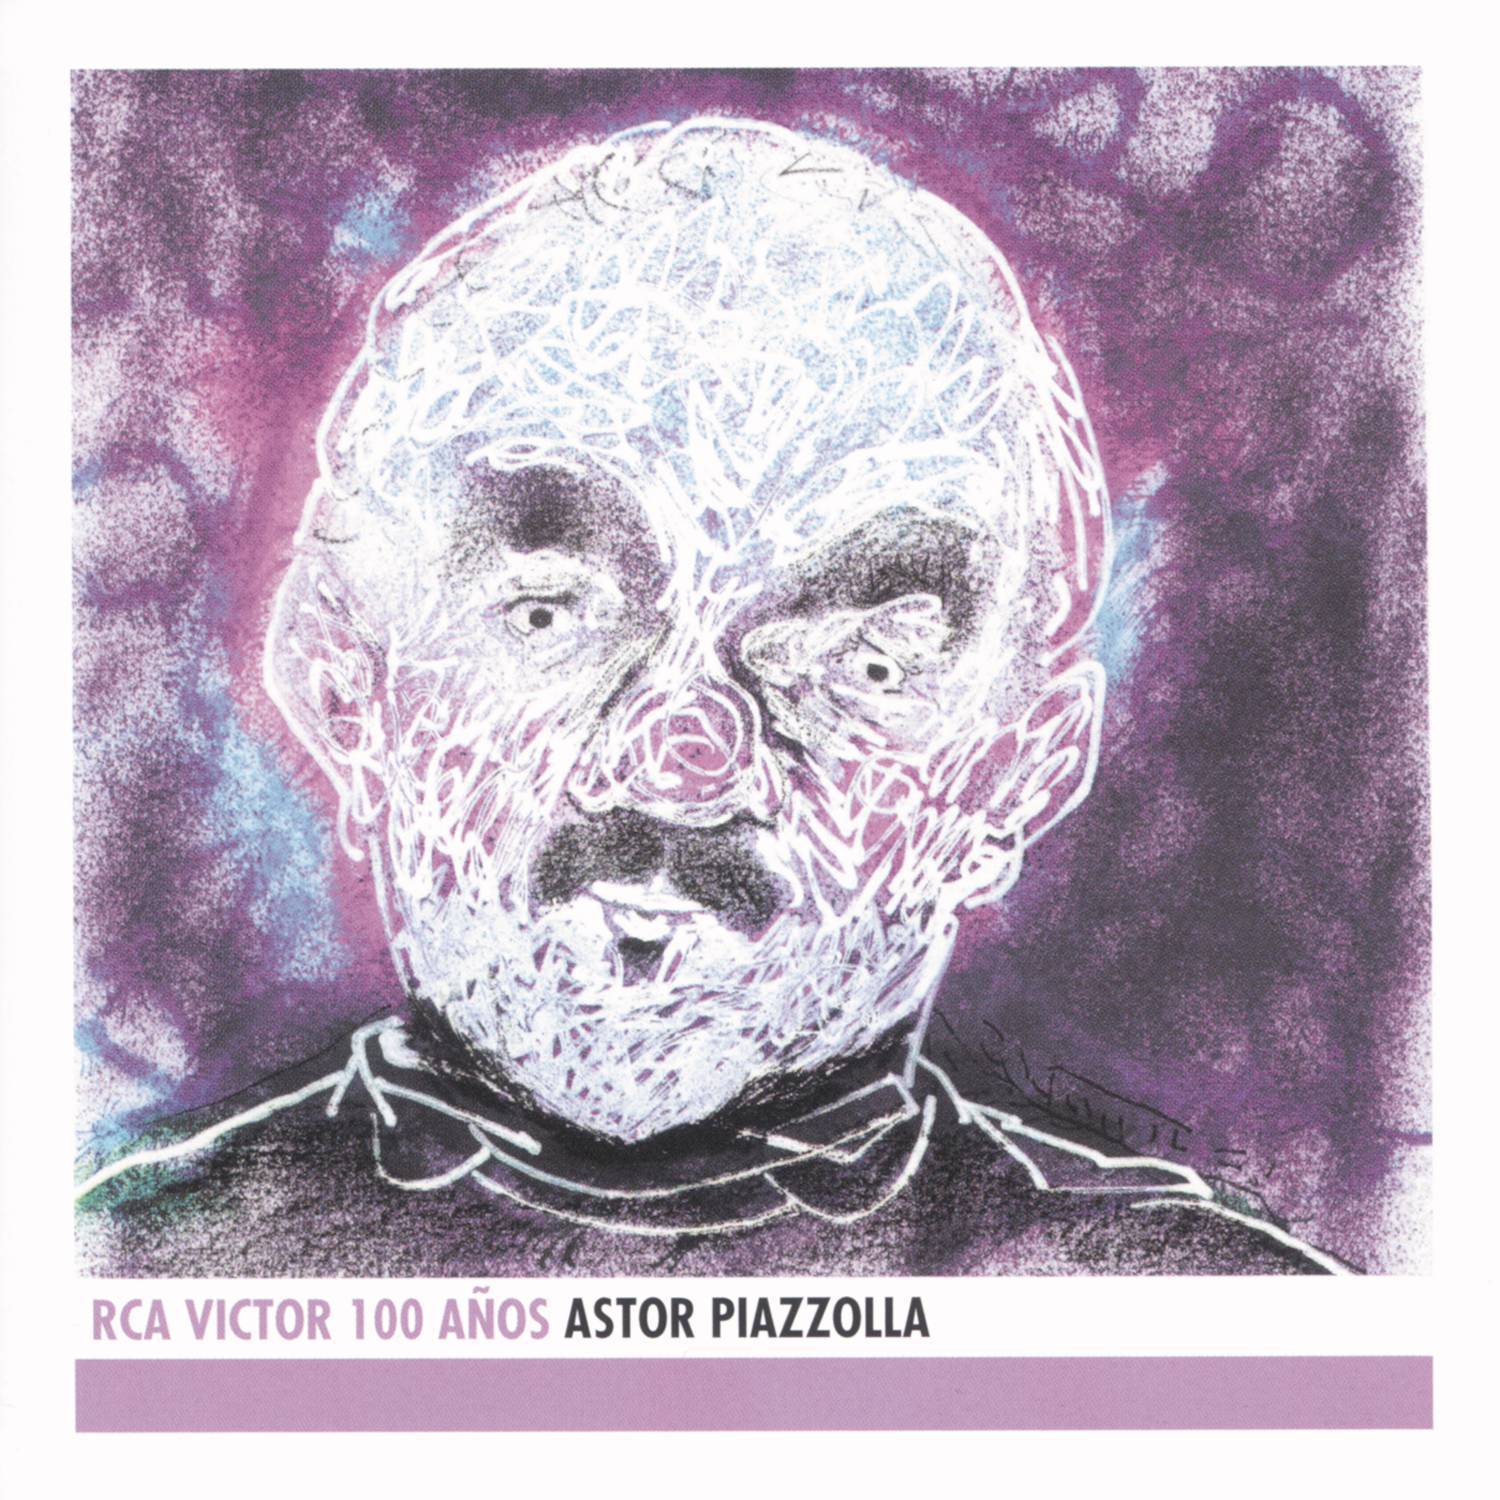 Astor Piazzolla  RCA Victor 100 A os